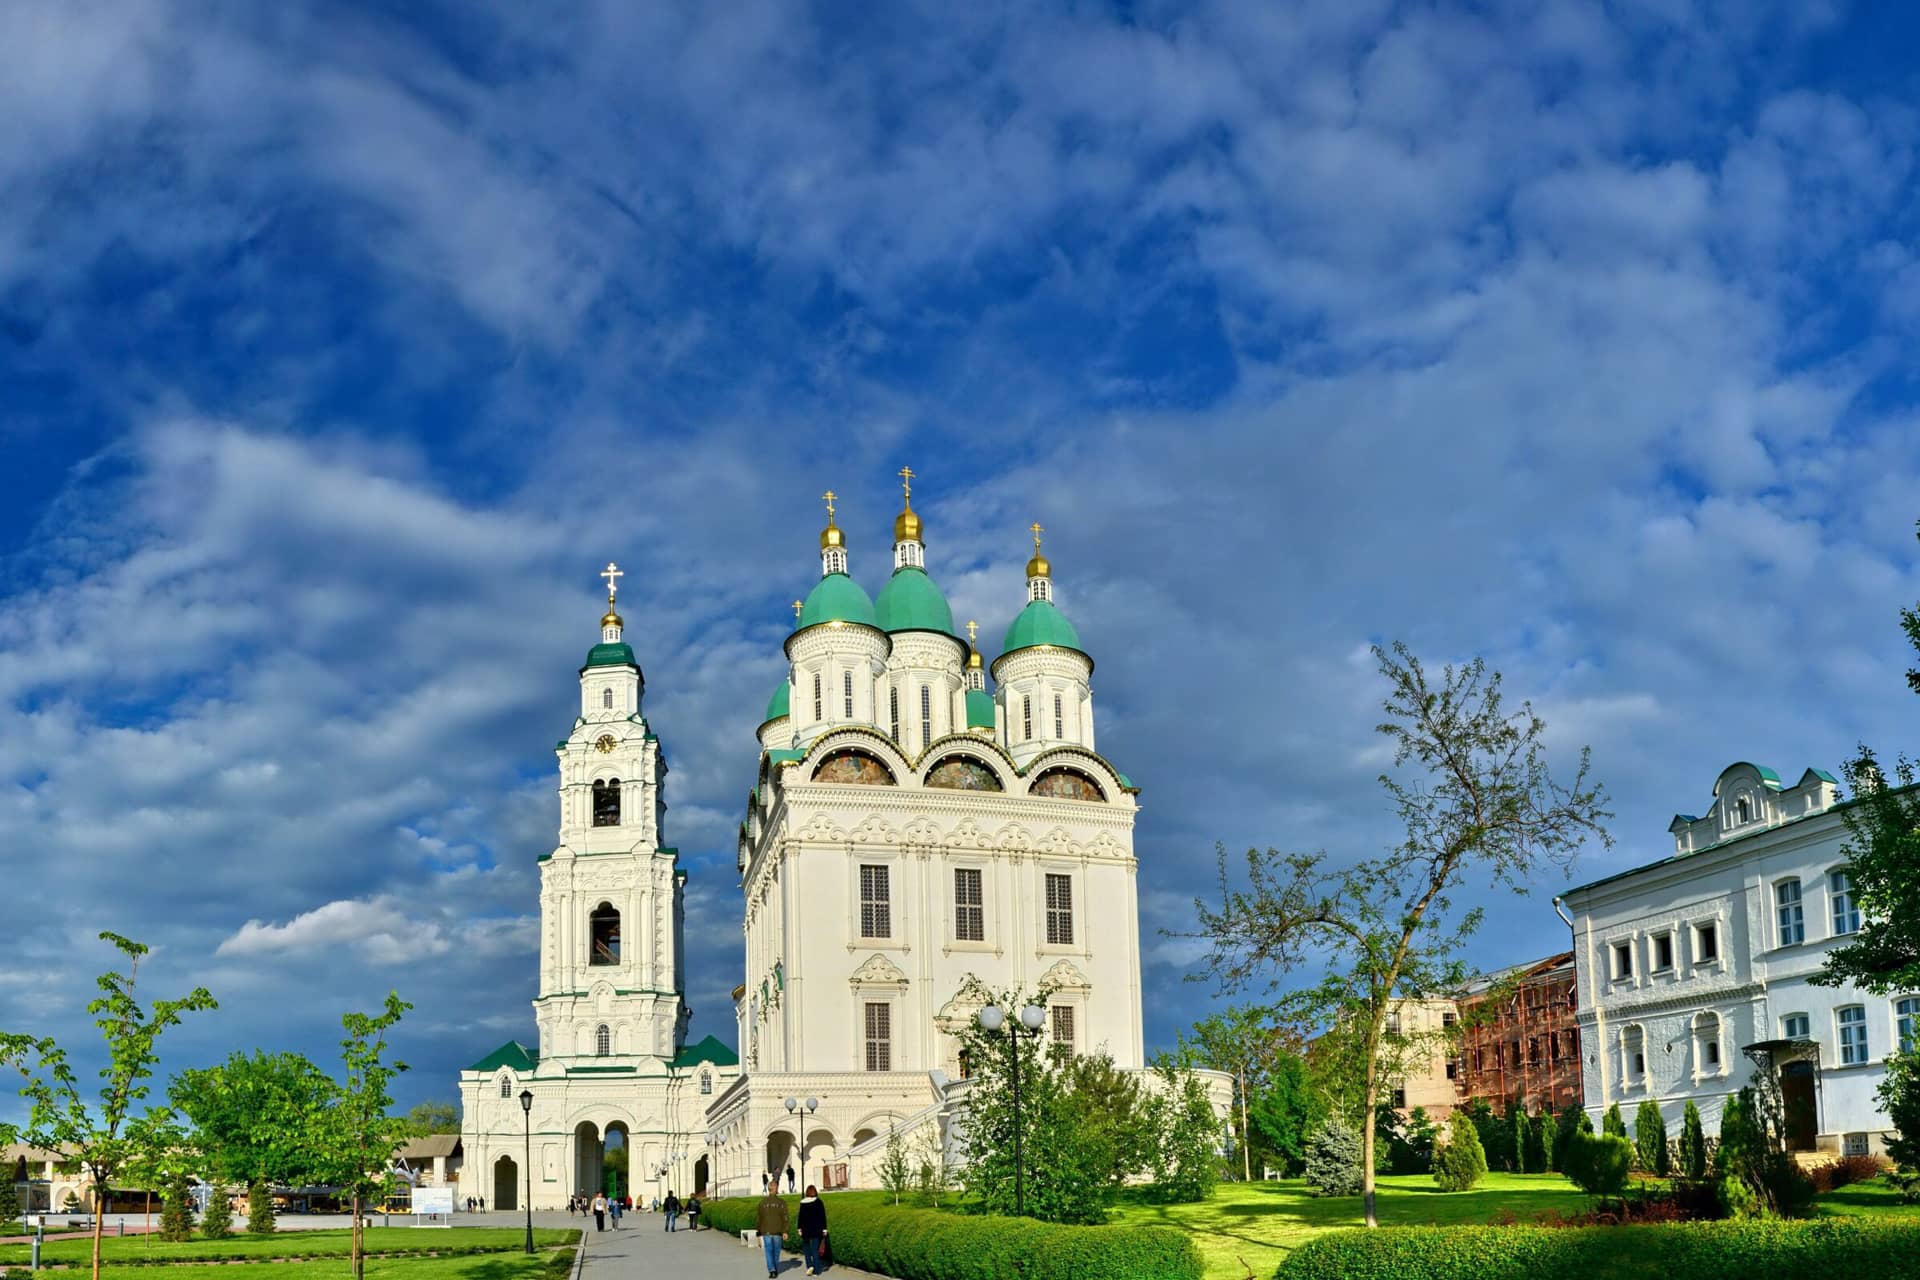 A white cathedral with green domes inside of the Kremlin